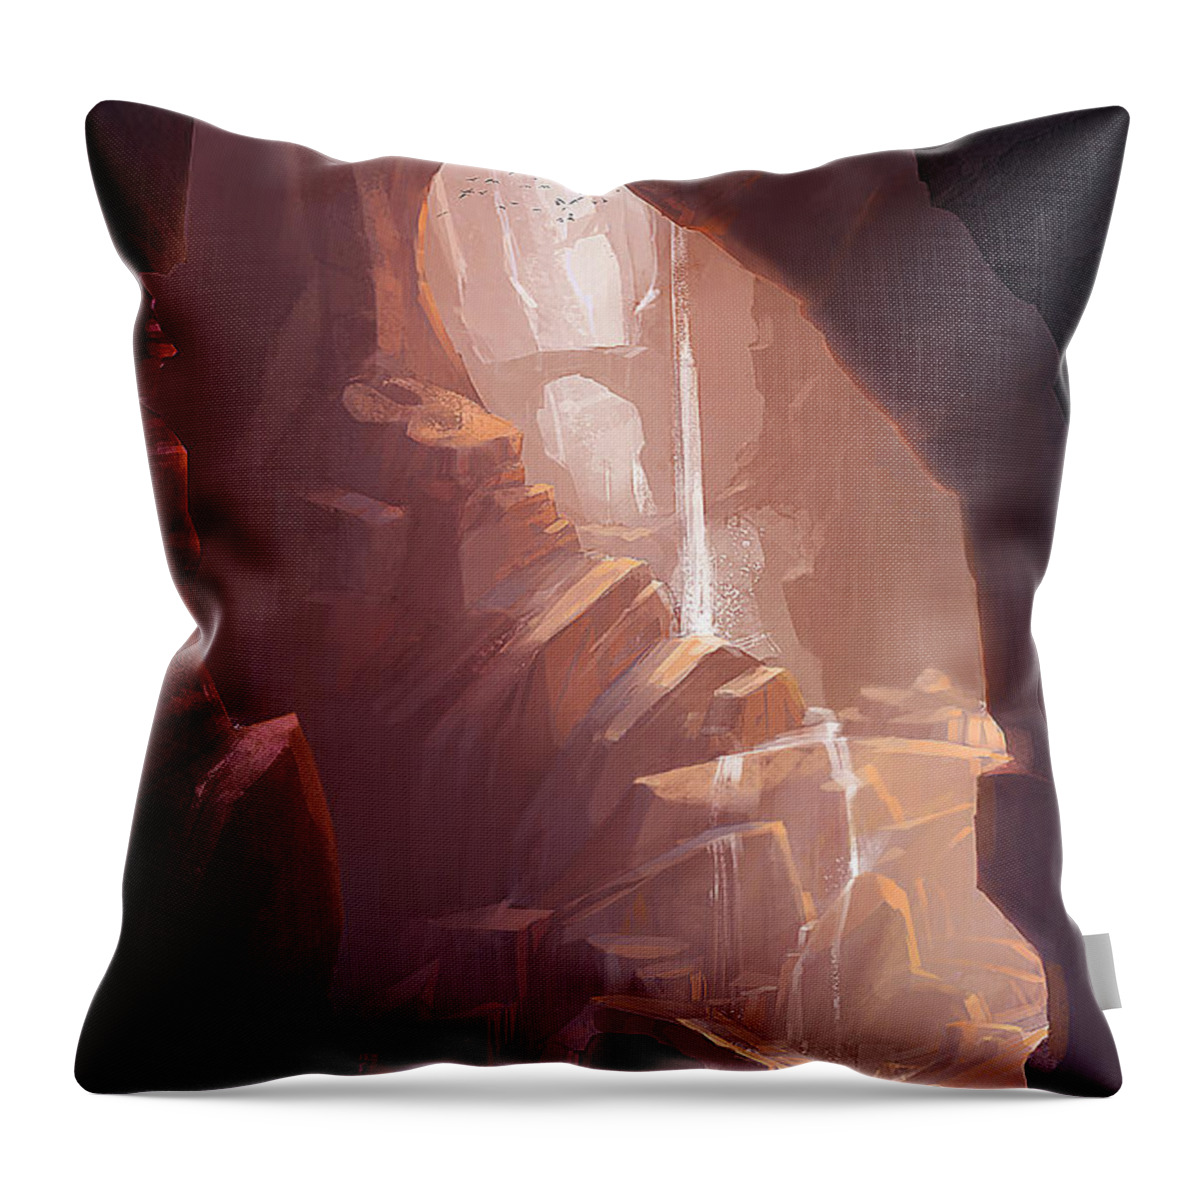 Canyon Throw Pillow featuring the painting The Big Friendly Giant by Kristina Vardazaryan